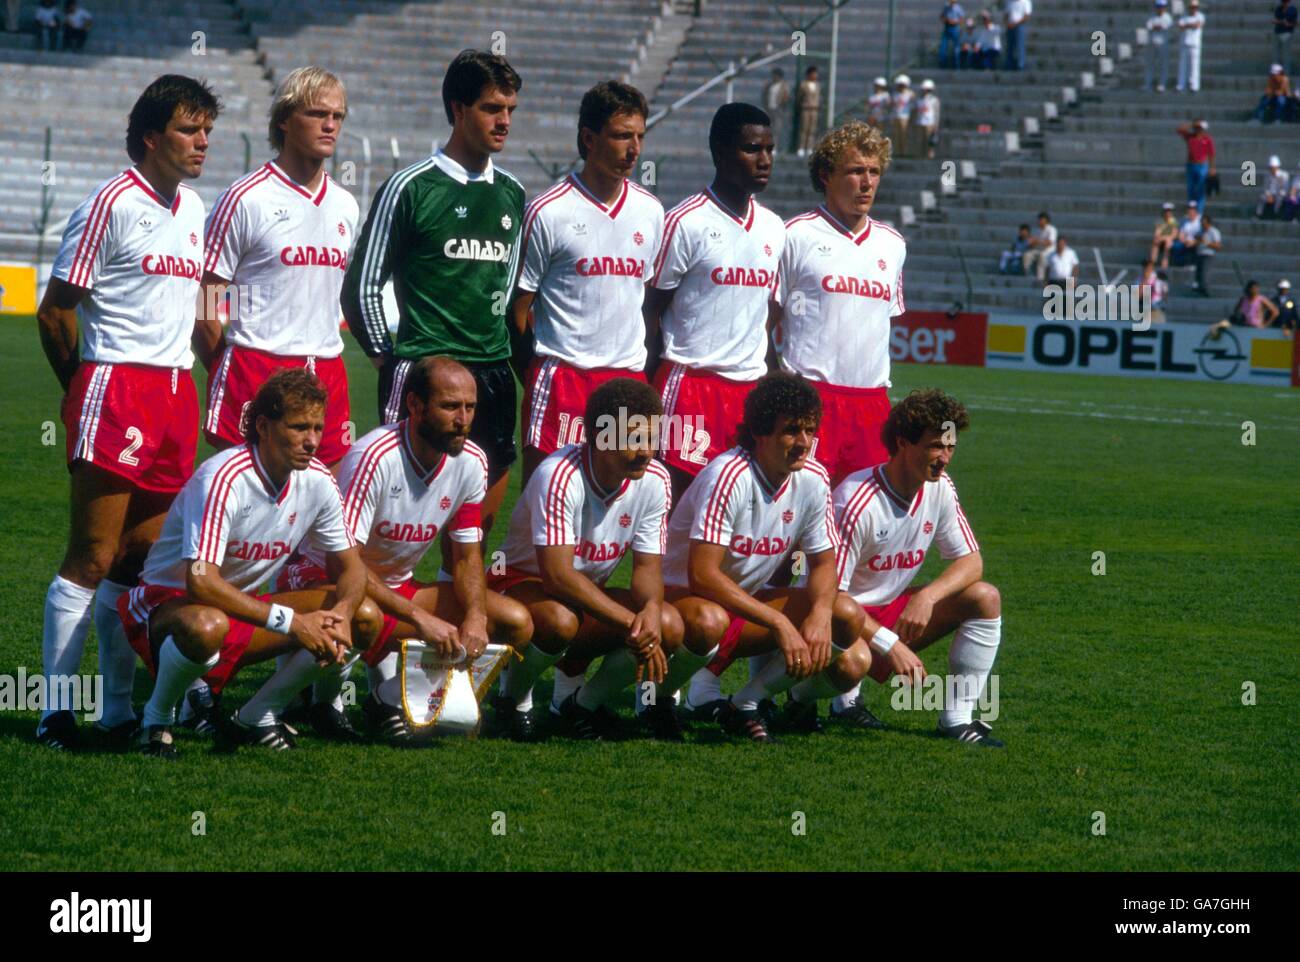 Soccer - World Cup Mexico 86 - Group C - France v Canada. Canada team group  Stock Photo - Alamy